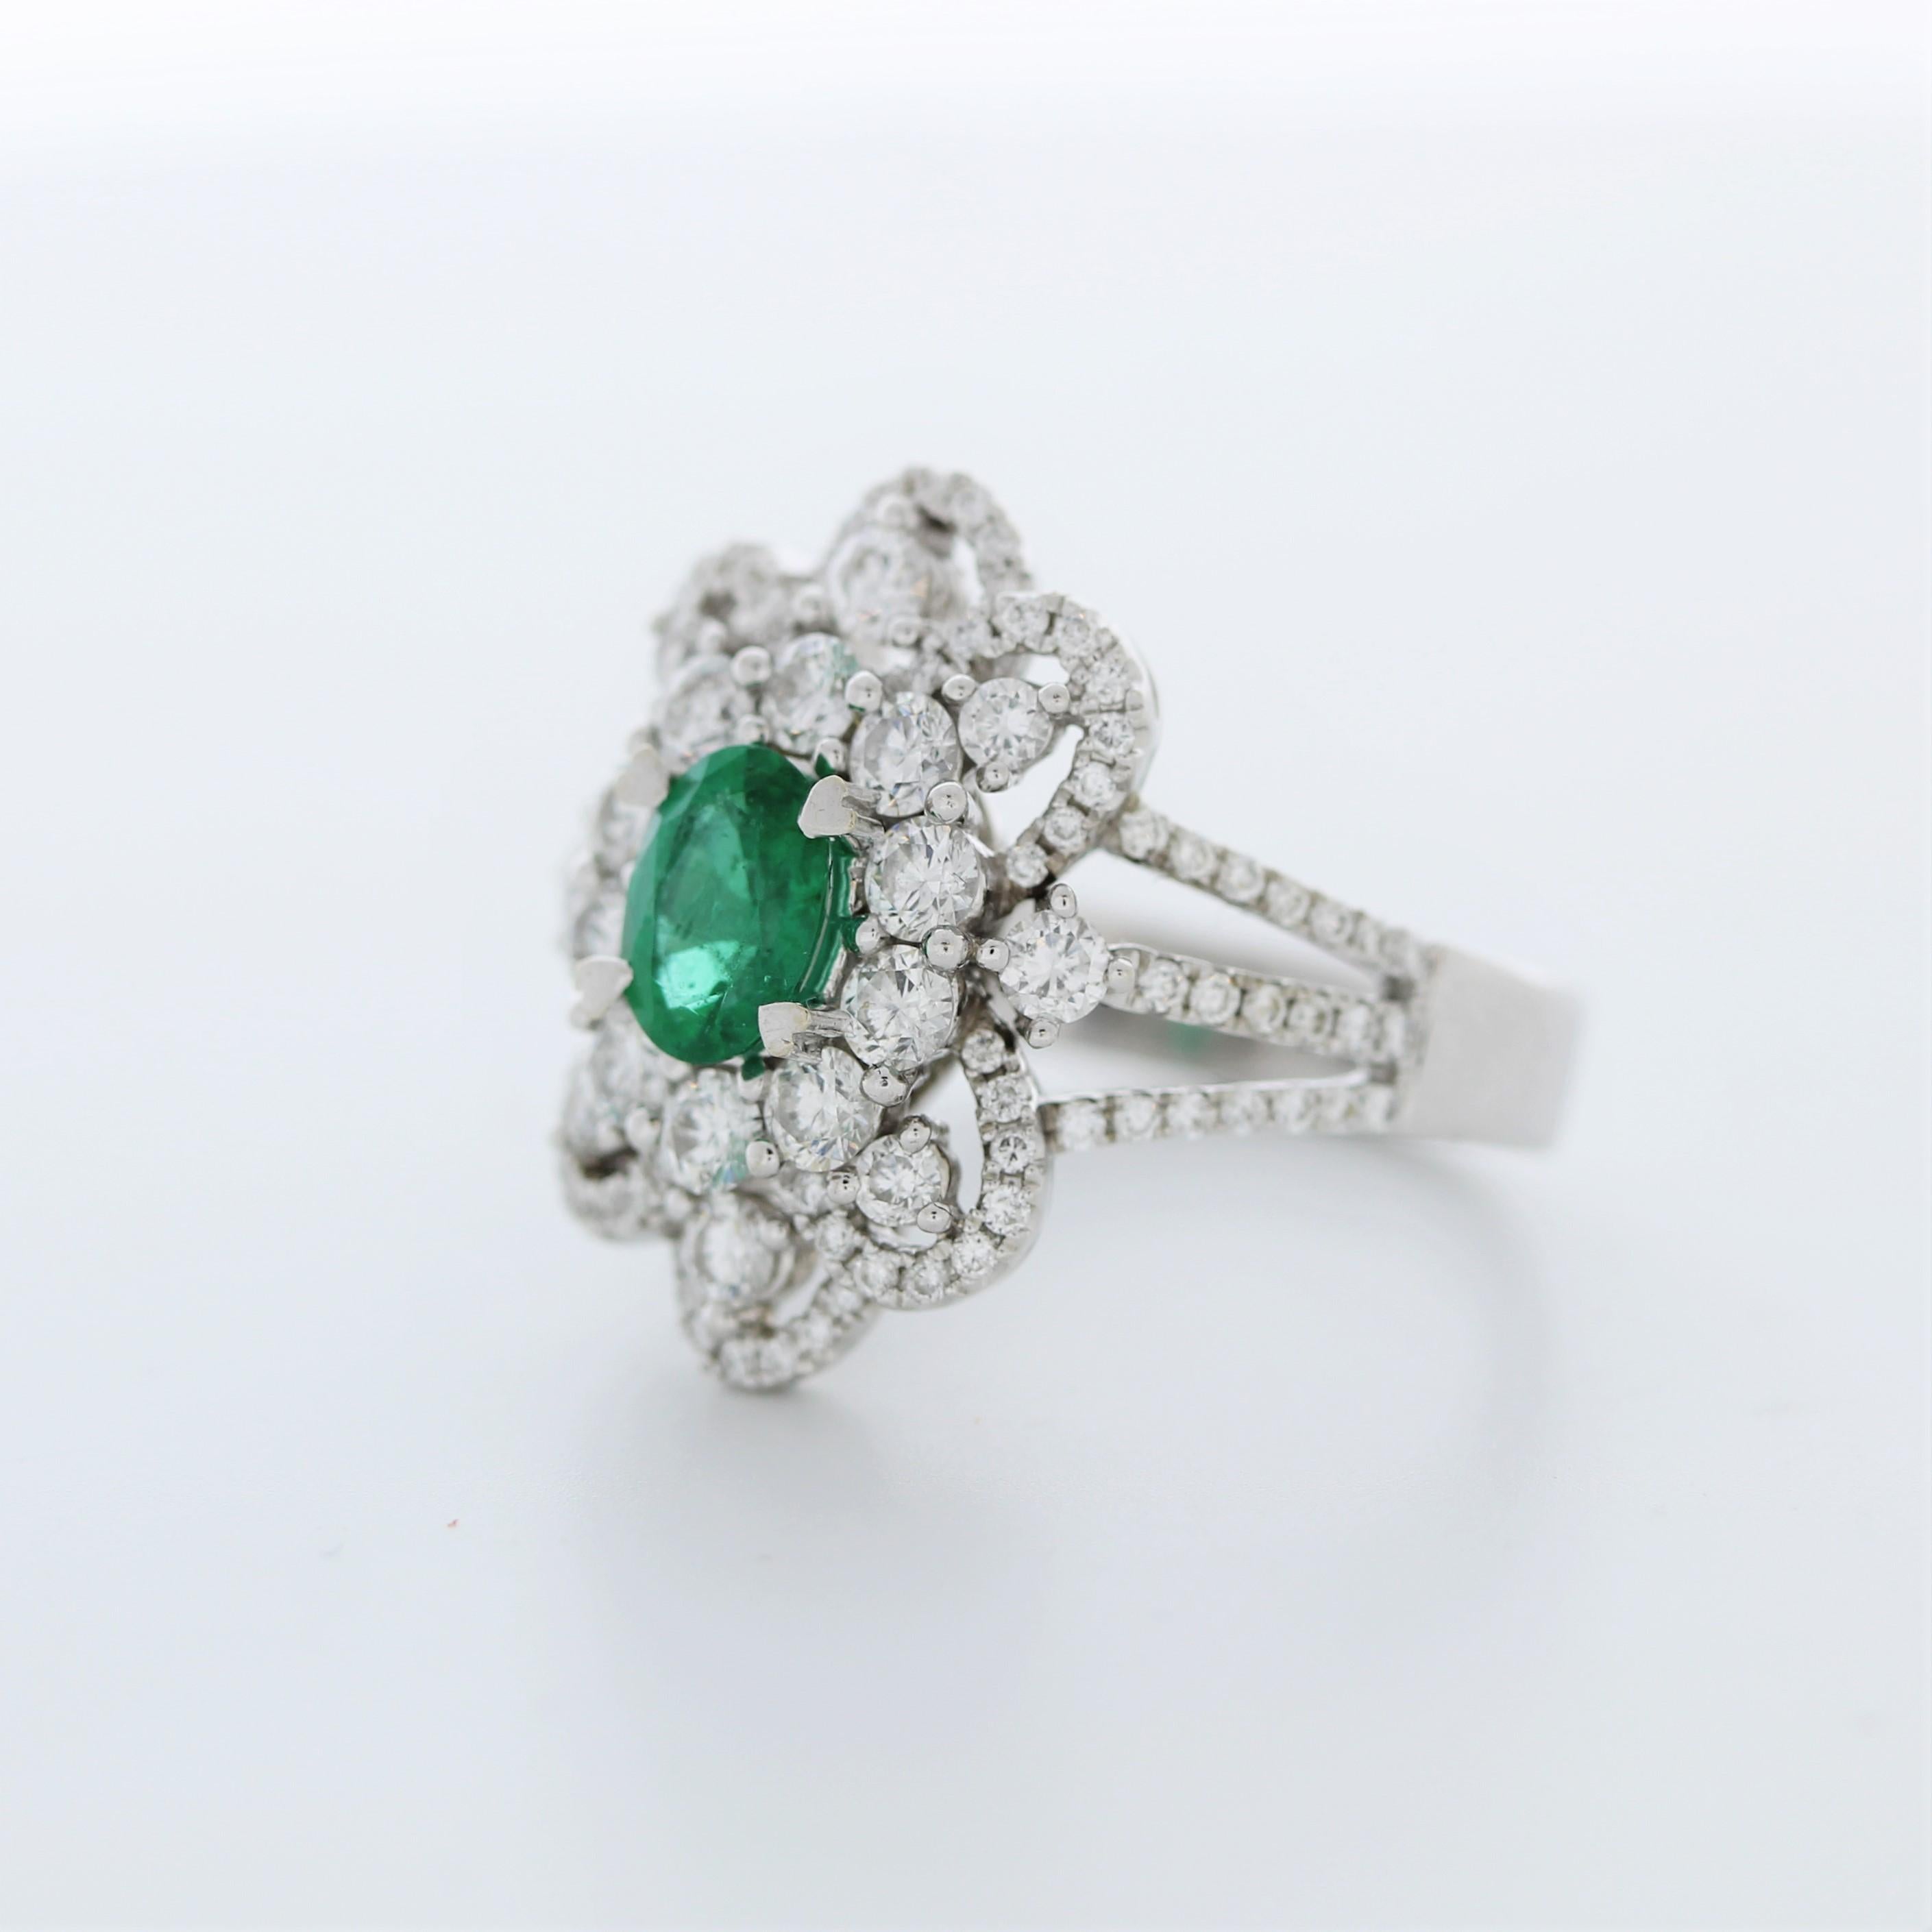 A fashion ring that features an oval-shaped Emerald gemstone set in 14k white gold (14k WG). The Emerald gemstone has a weight of approximately 1.10 carats. The ring also includes round-cut diamonds, with a total quantity of 108 diamonds.